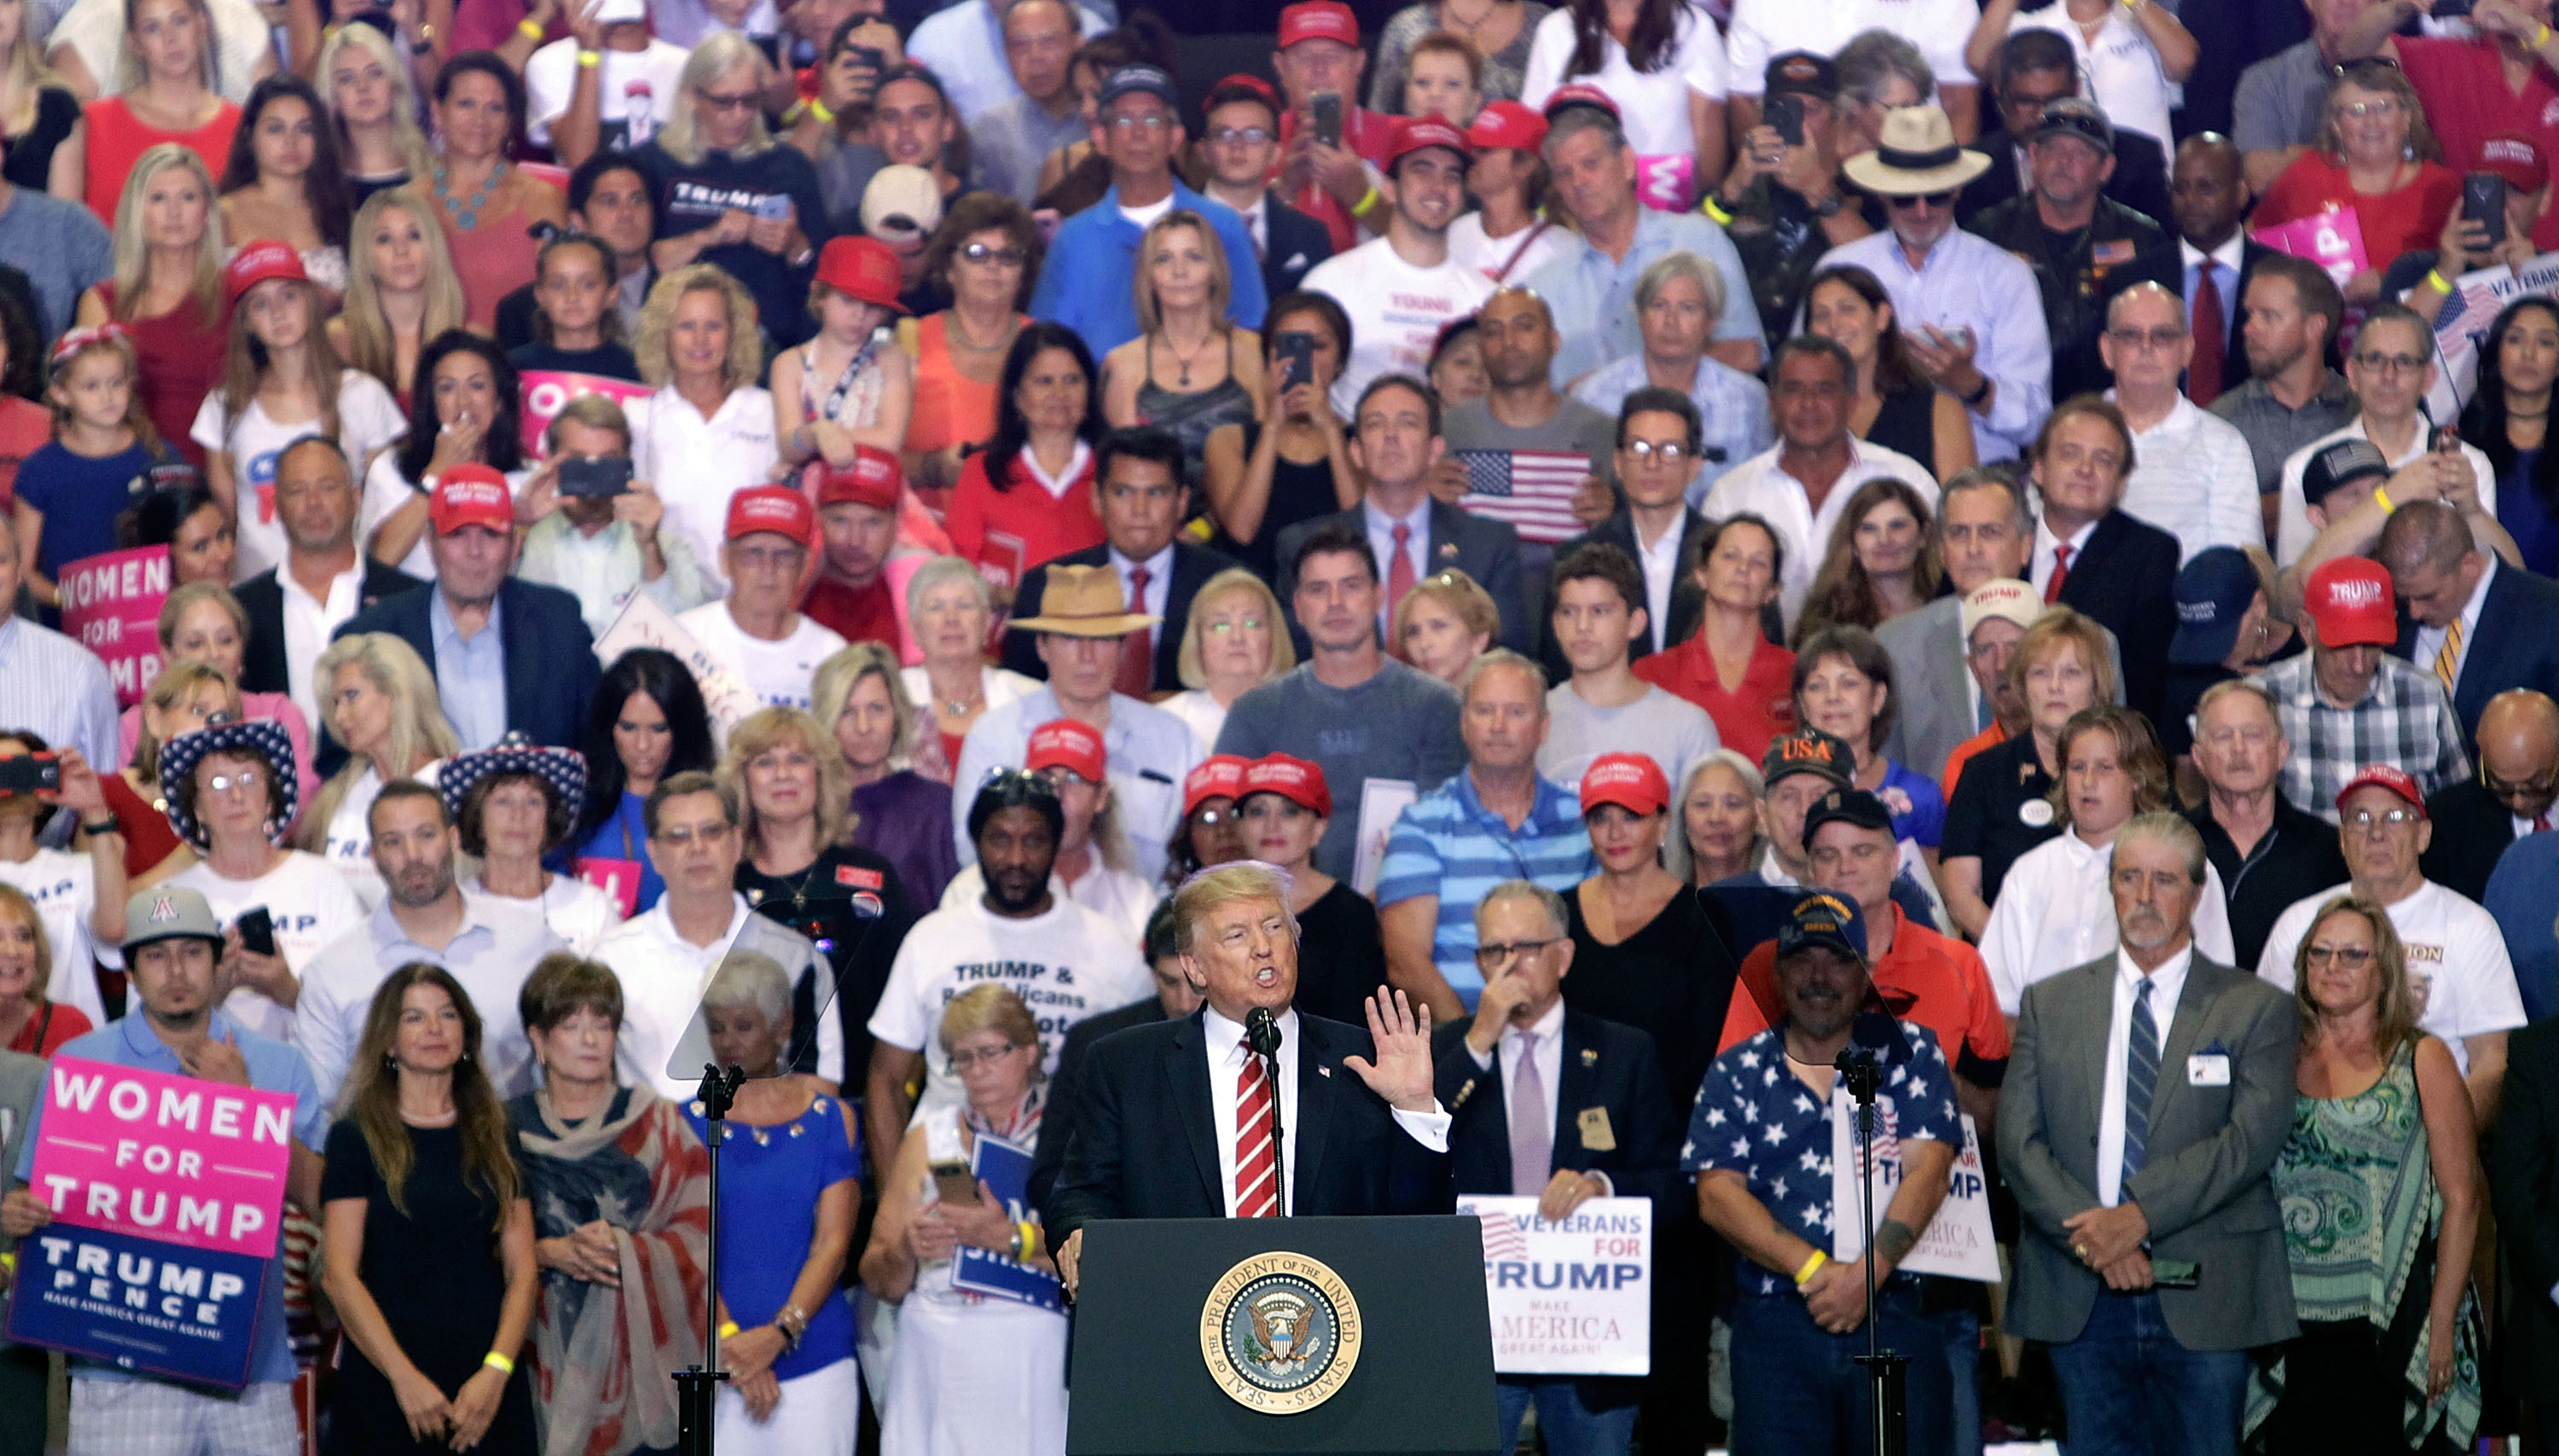 President Donald Trump speaks to a crowd of supporters at the Phoenix Convention Center during a rally on August 22, 2017 in Phoenix, Arizona. (Ralph Freso&mdash;Getty Images)